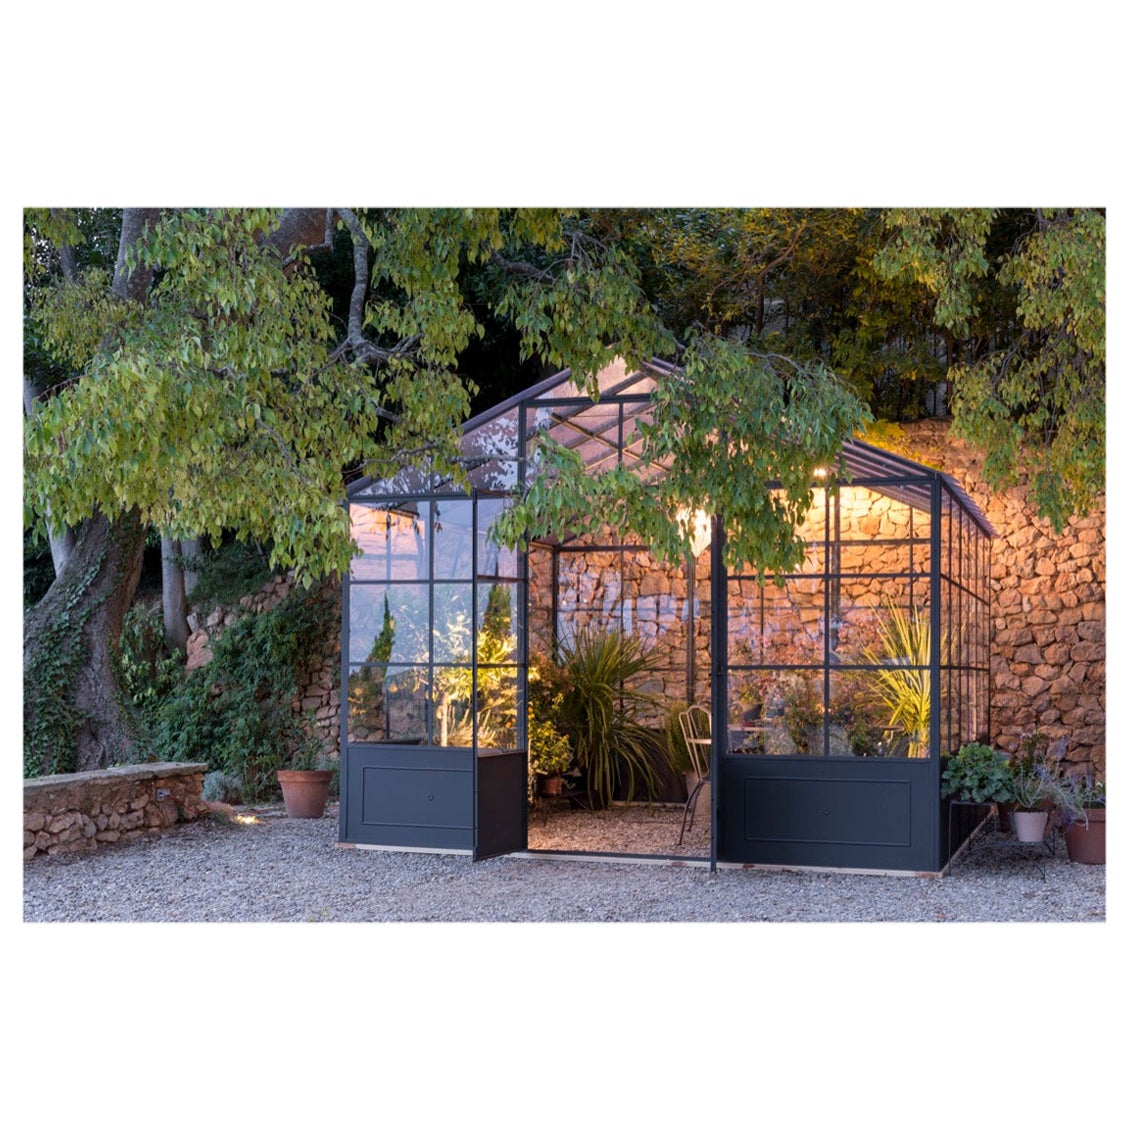 Unopiu' Orangerie Green house Collection For Sale